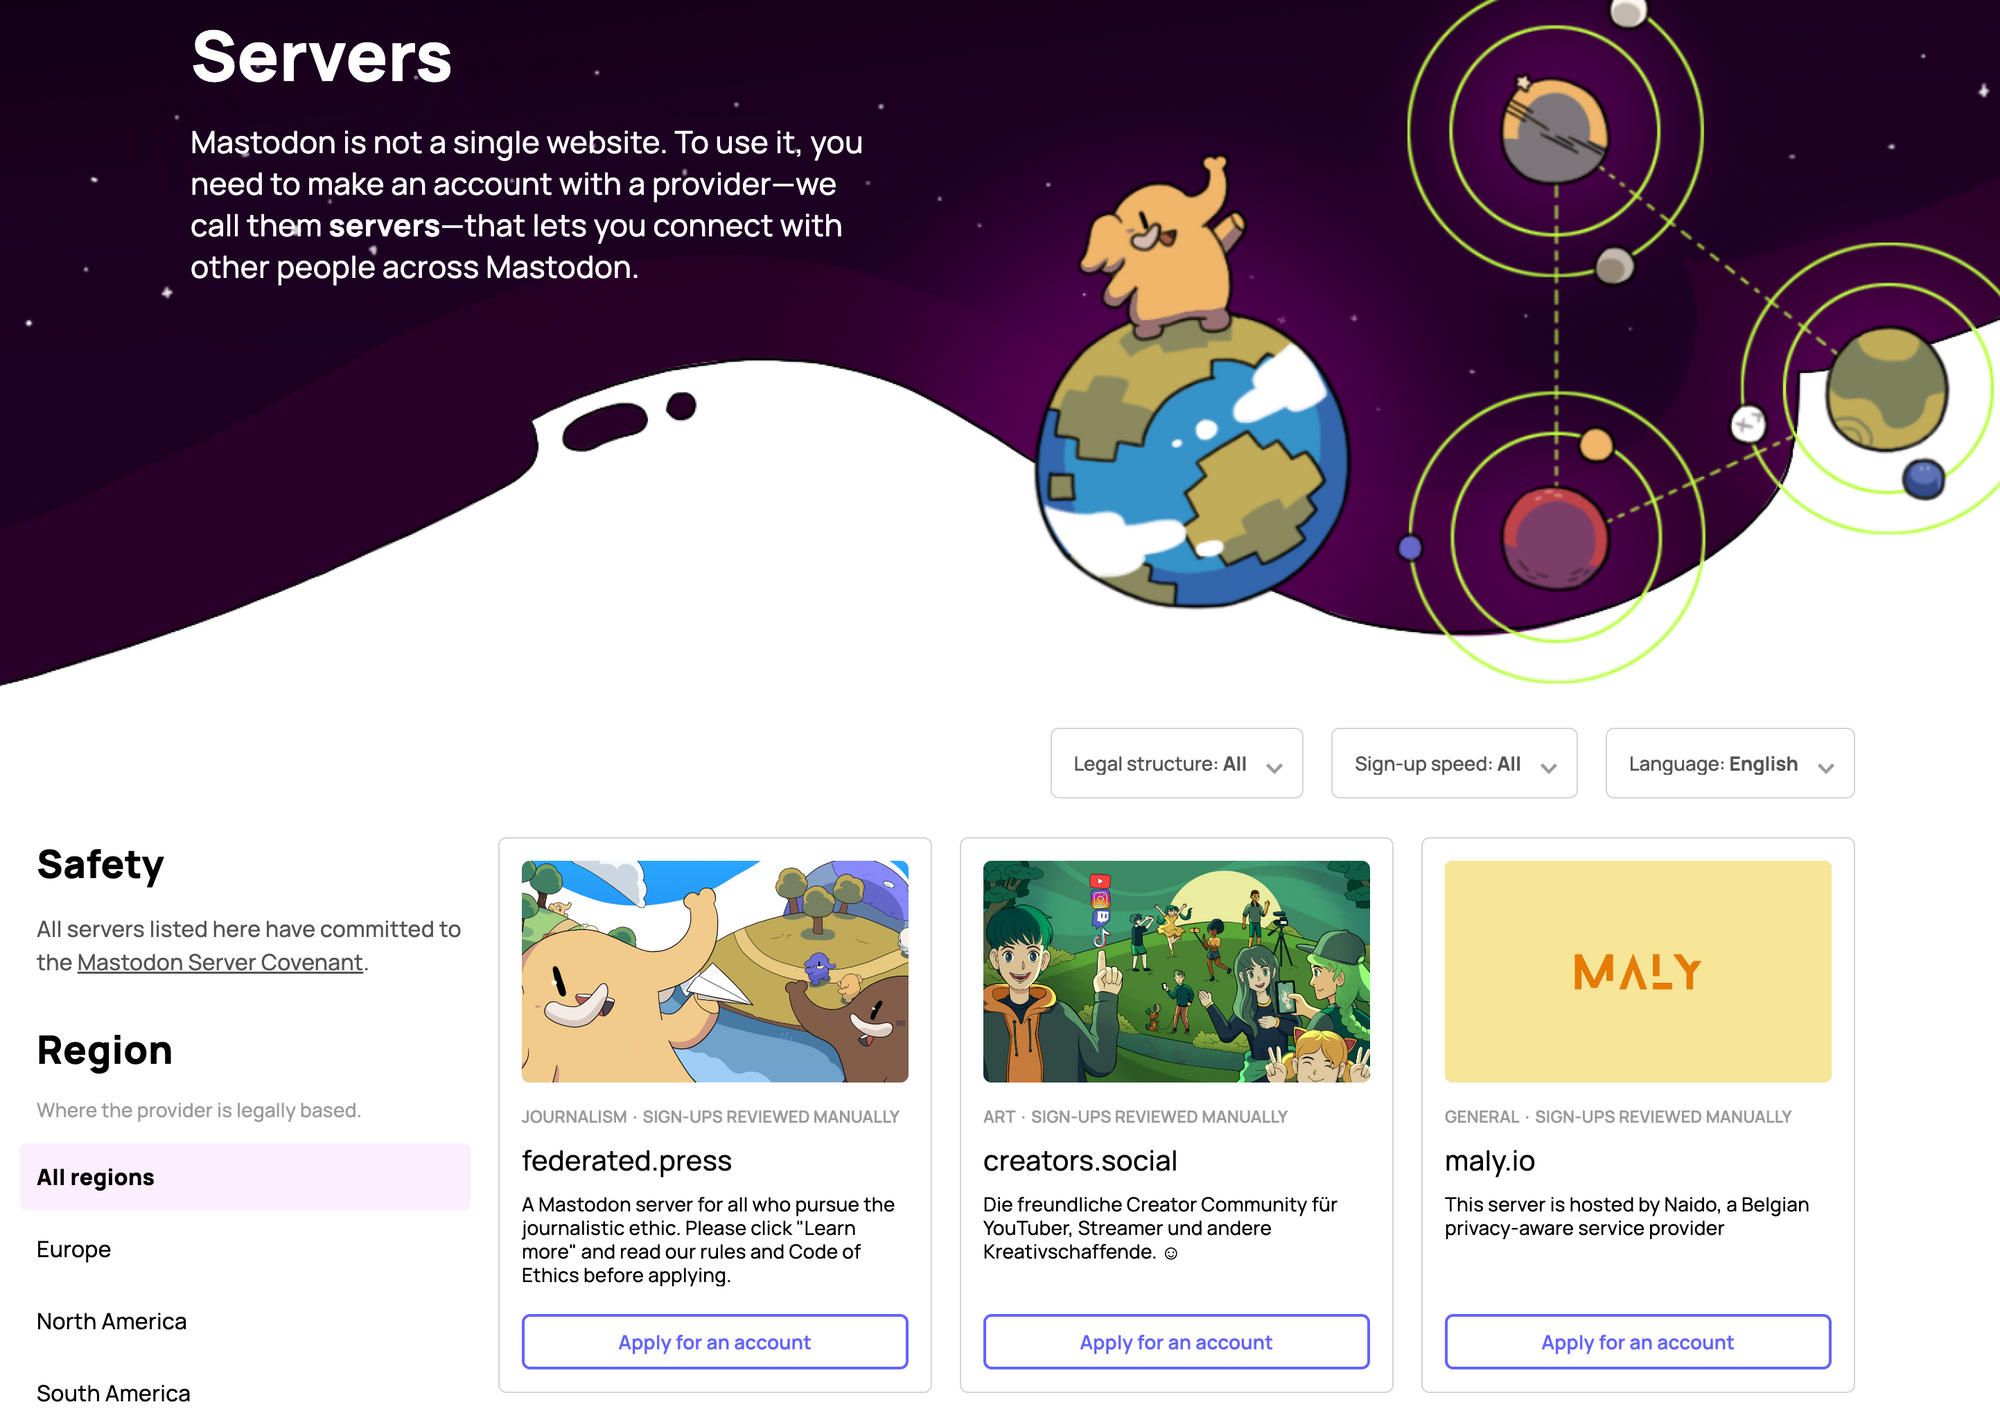 A screenshot of the Mastodon Servers website. At the top left, "Servers. Mastodon is not a single website. To use it, you need to make an account with a provider -- we call them servers -- that lets you connect with other people across Mastodon". The sidebar of the page lists regions you can filter servers down to, and the main body of the page has the top three servers where you can apply to an account,"